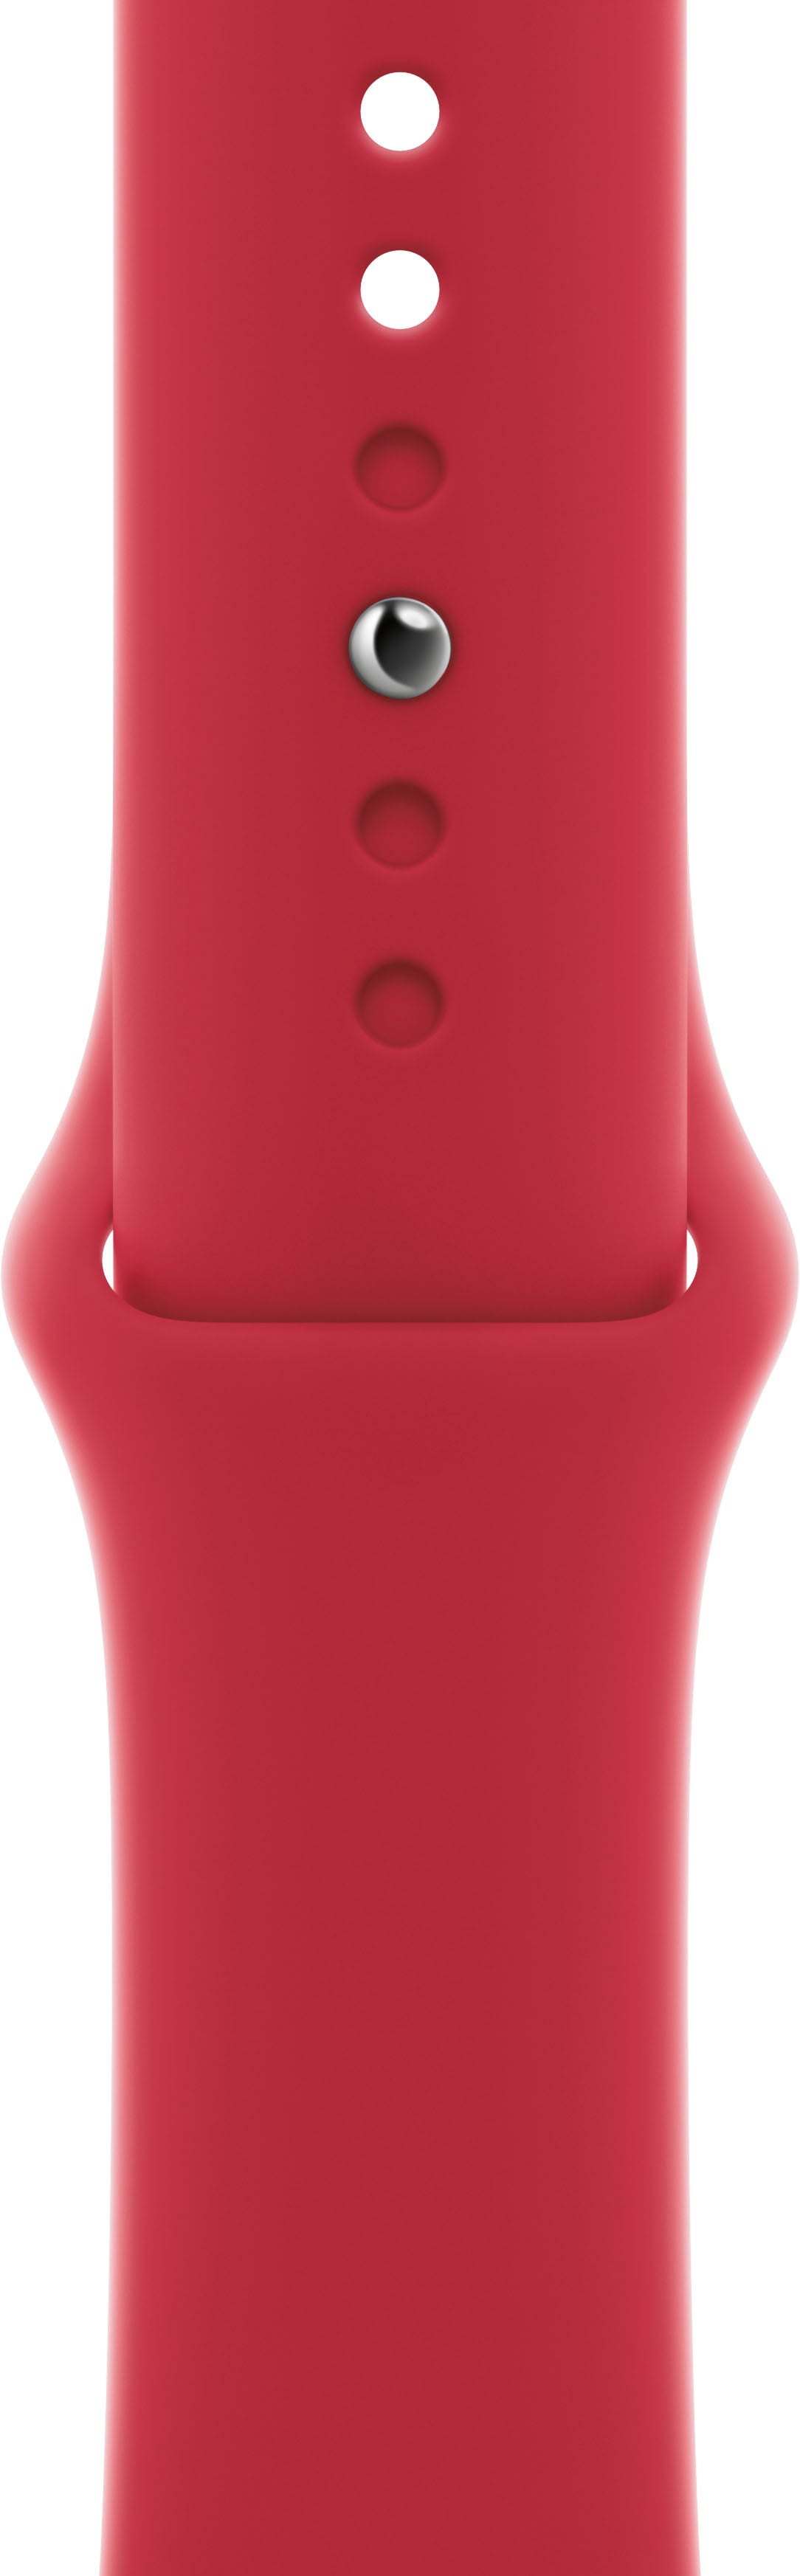 Sport Band for Apple Watch™ 41mm - (PRODUCT)RED $24.99